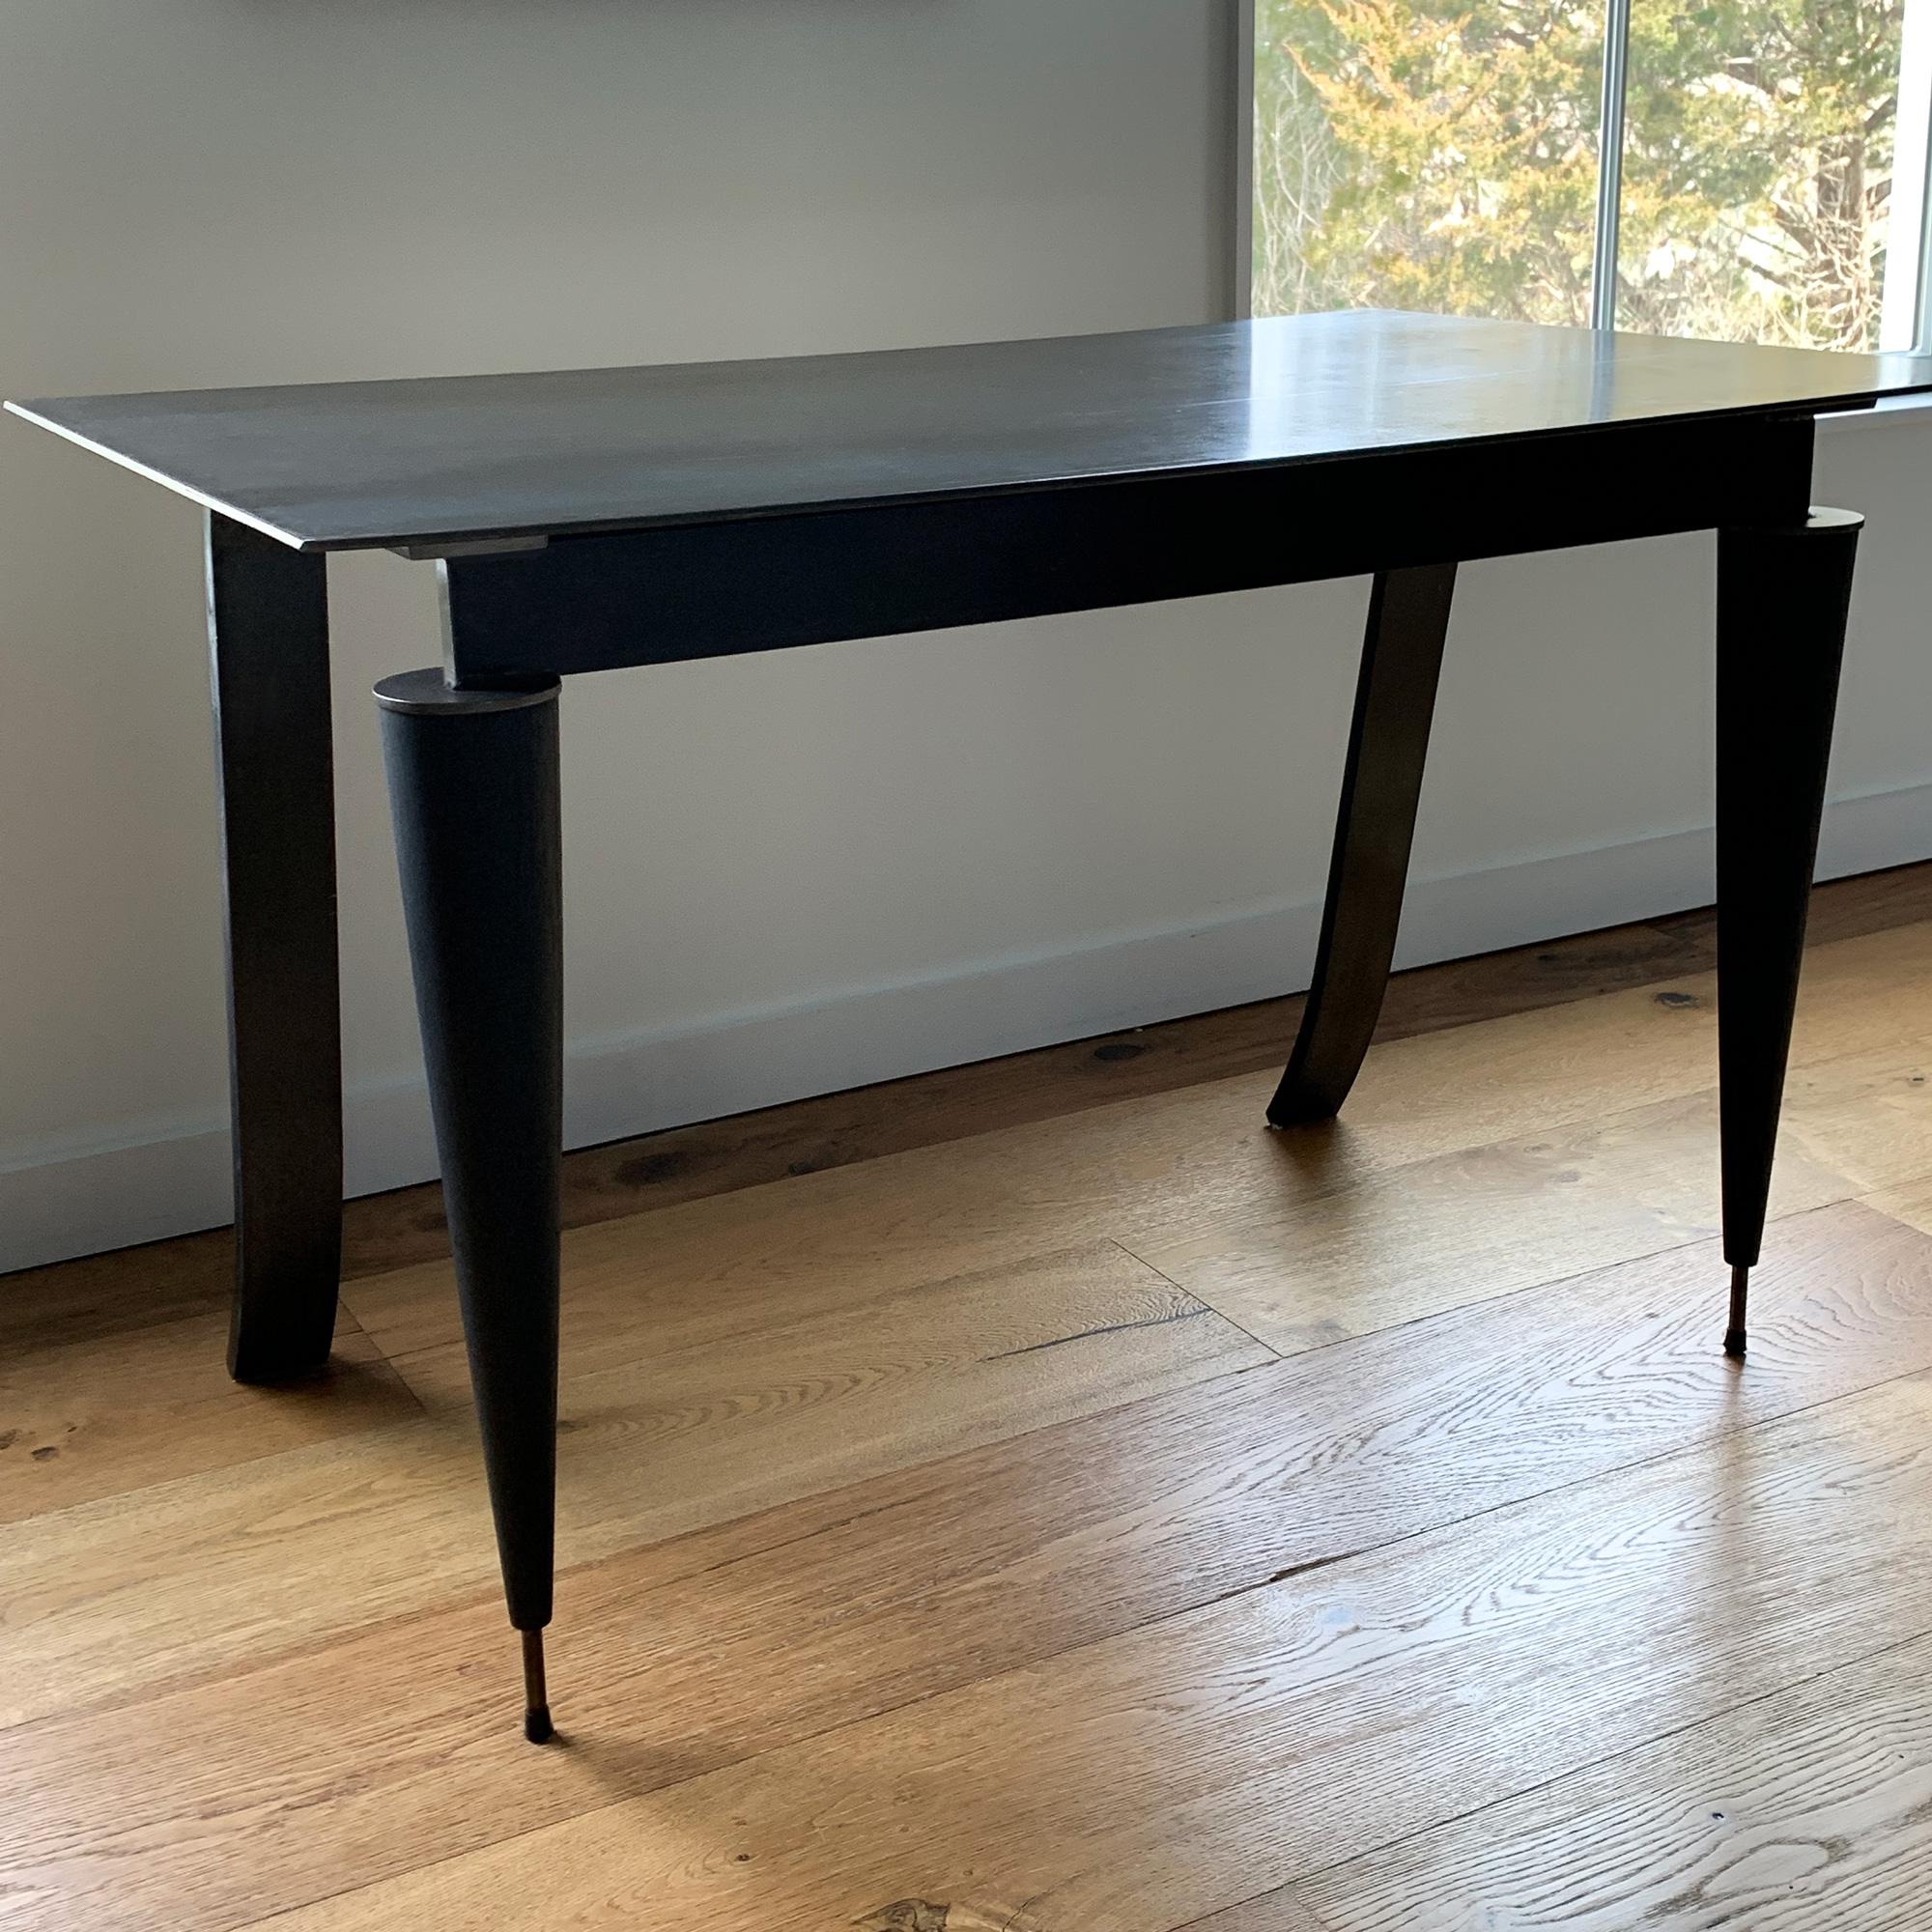 Bronze Age desk by Mark Zeff, hot rolled steel with wood tanned top.

Bronze Age collection by Mark Zeff
Bronze Age is a furniture collection designed by Mark Zeff. Zeff takes inspiration from his favorite designers from Art Deco and 1940s French